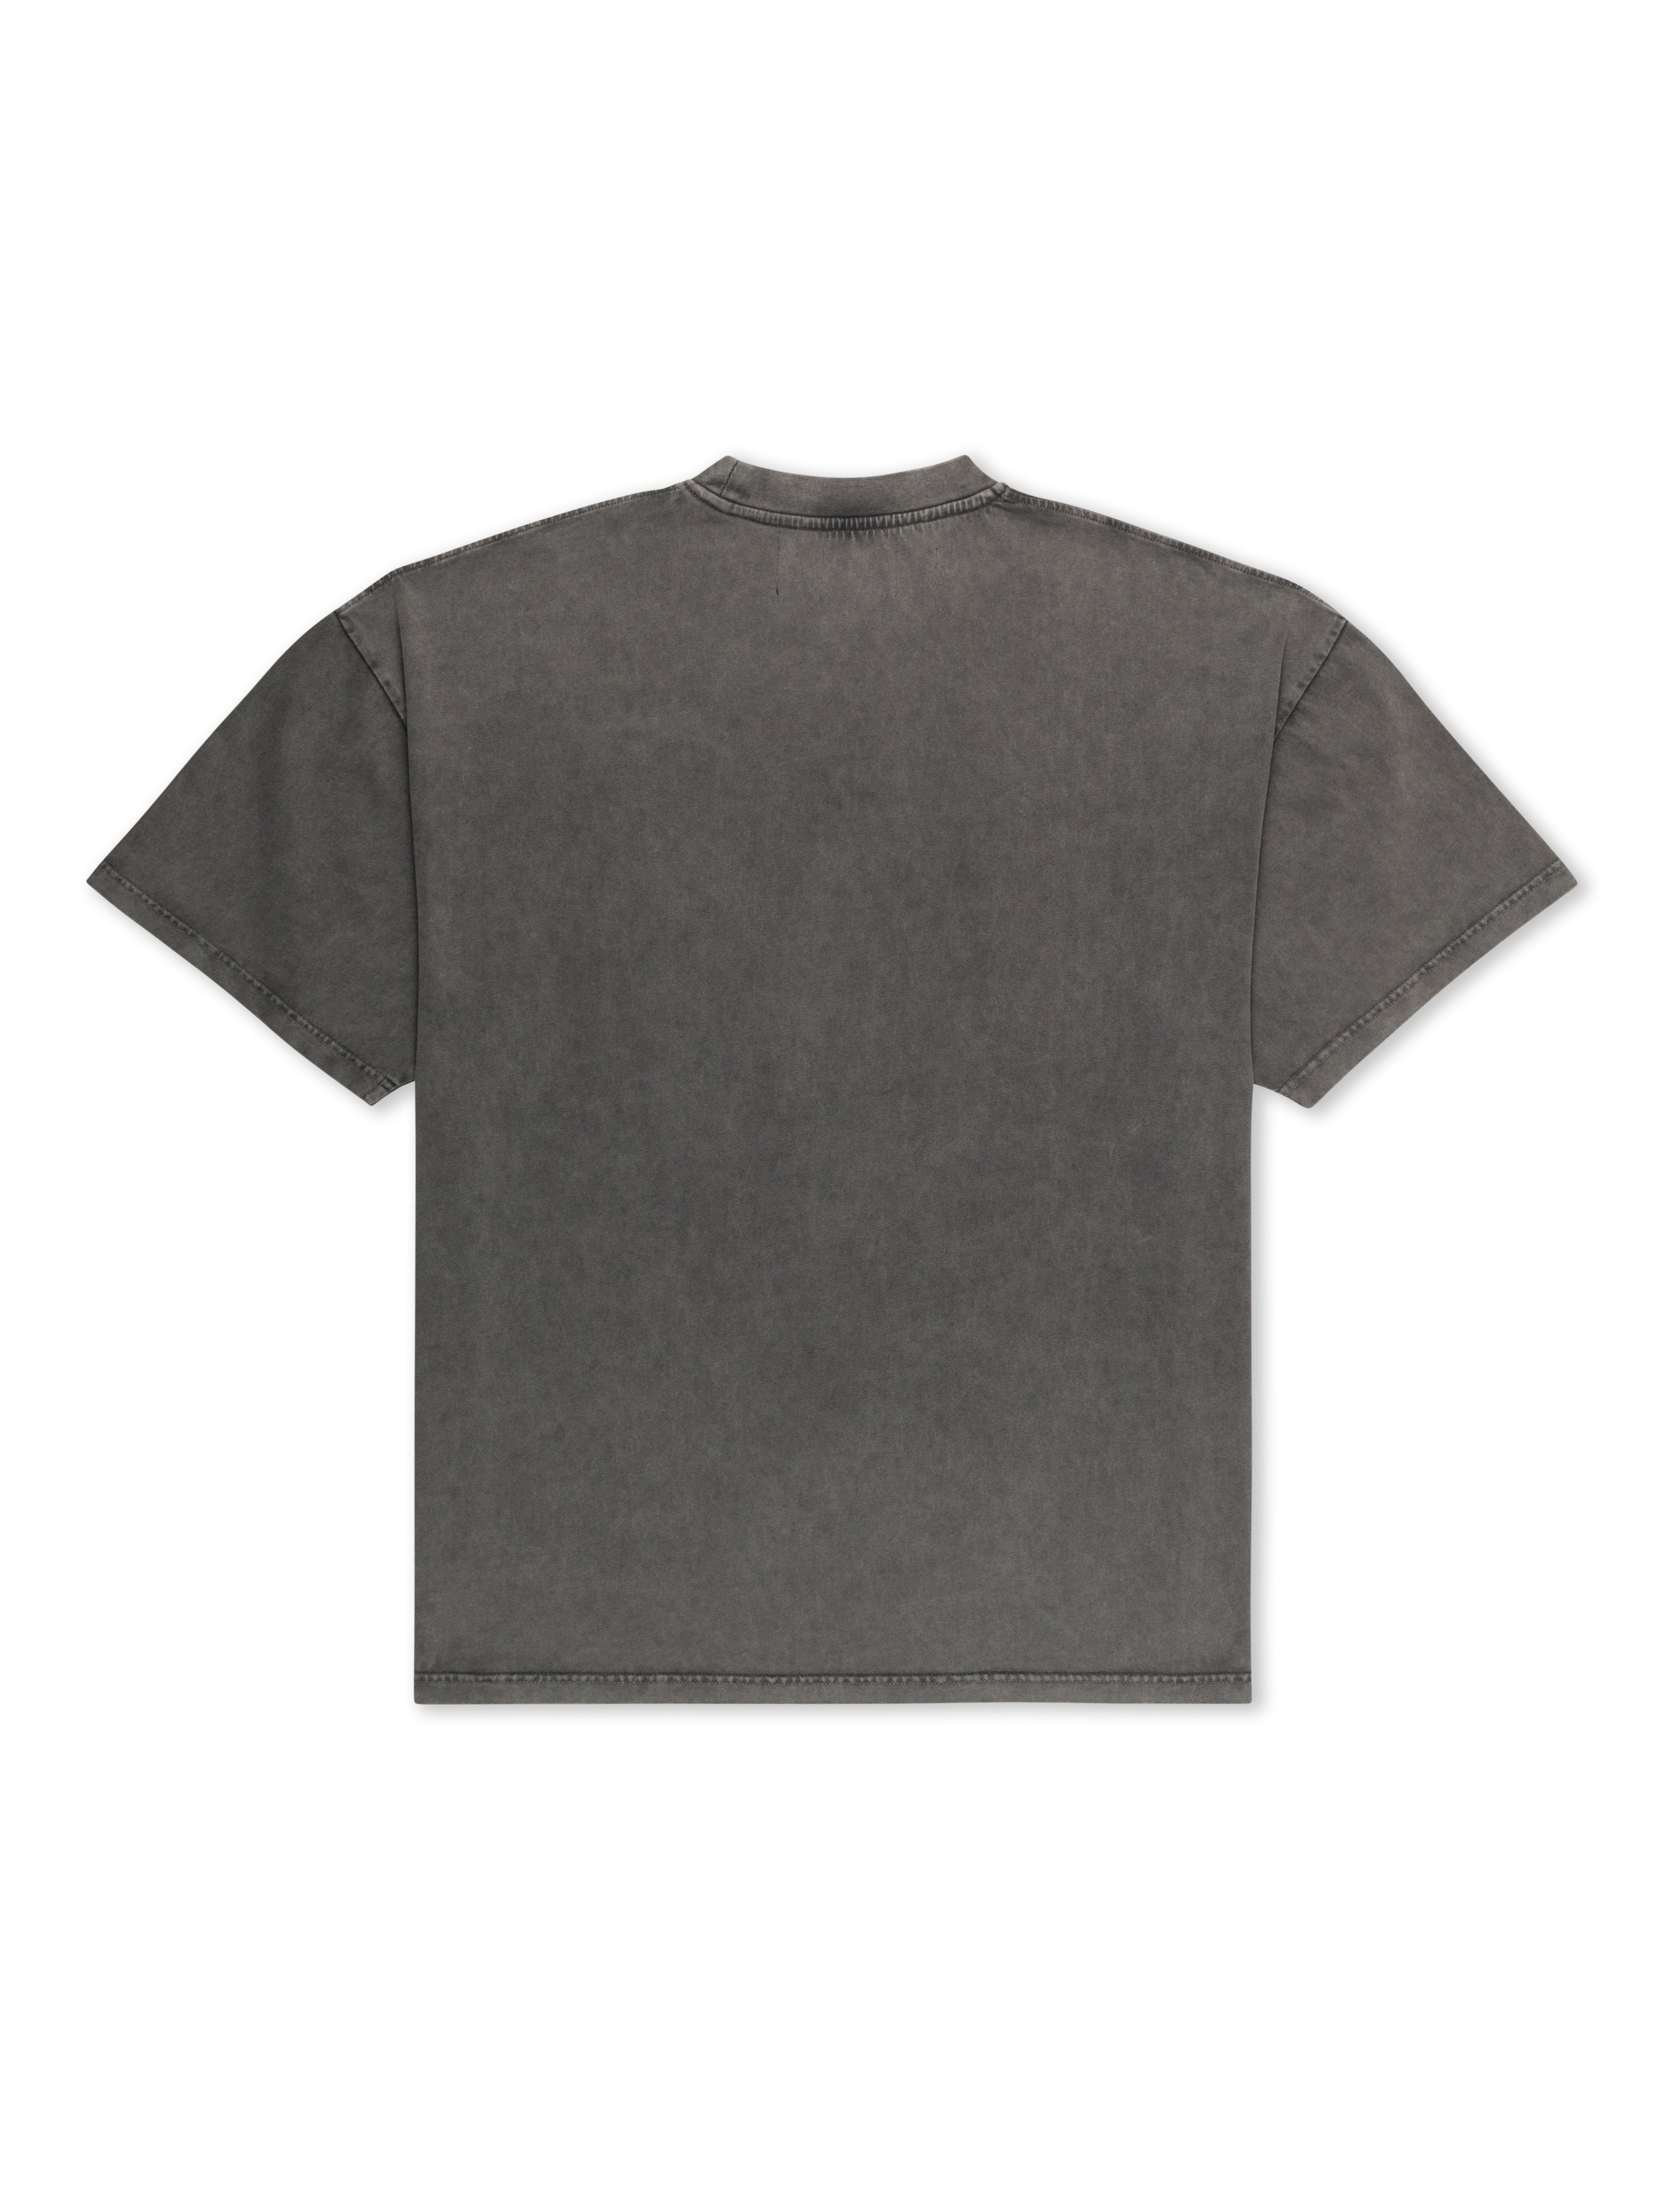 Sol Gym Heavy Metal Oversized T-Shirt, Charcoal